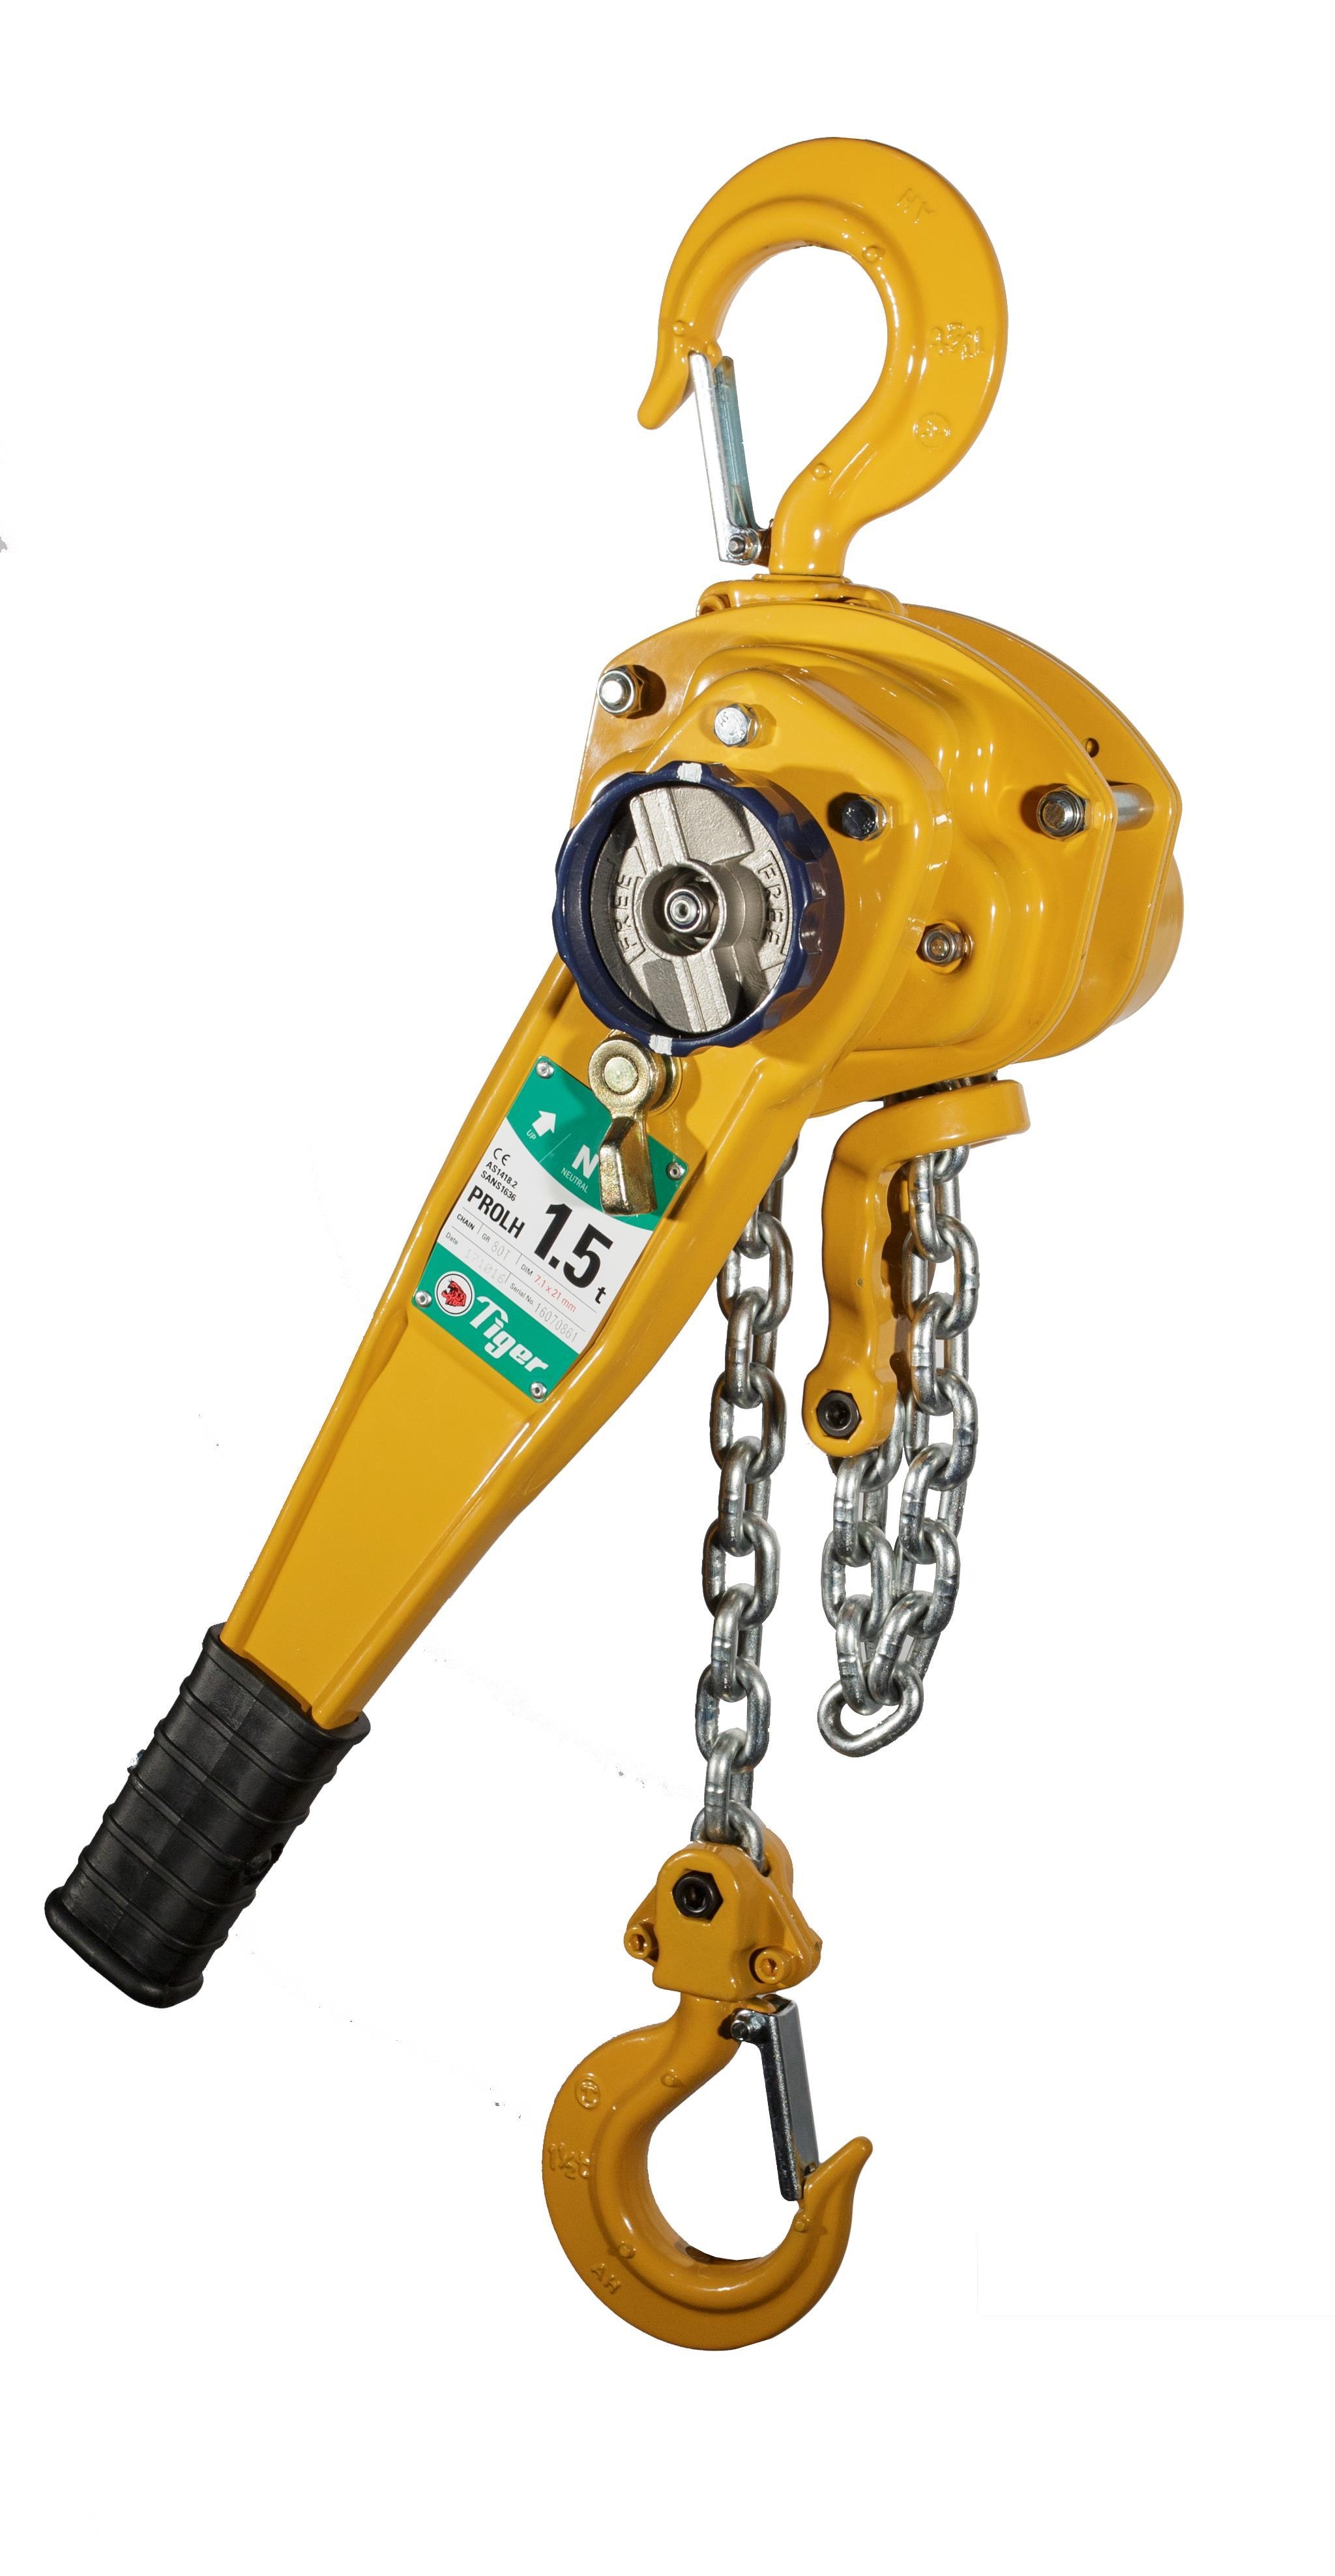 Hoistshop – Tiger Professional Lever Hoist Type PROLH – 3.0T Capacity With Travelling End-Stop – 210-21 – 5.5m – Stainless Steel – Yellow / Silver